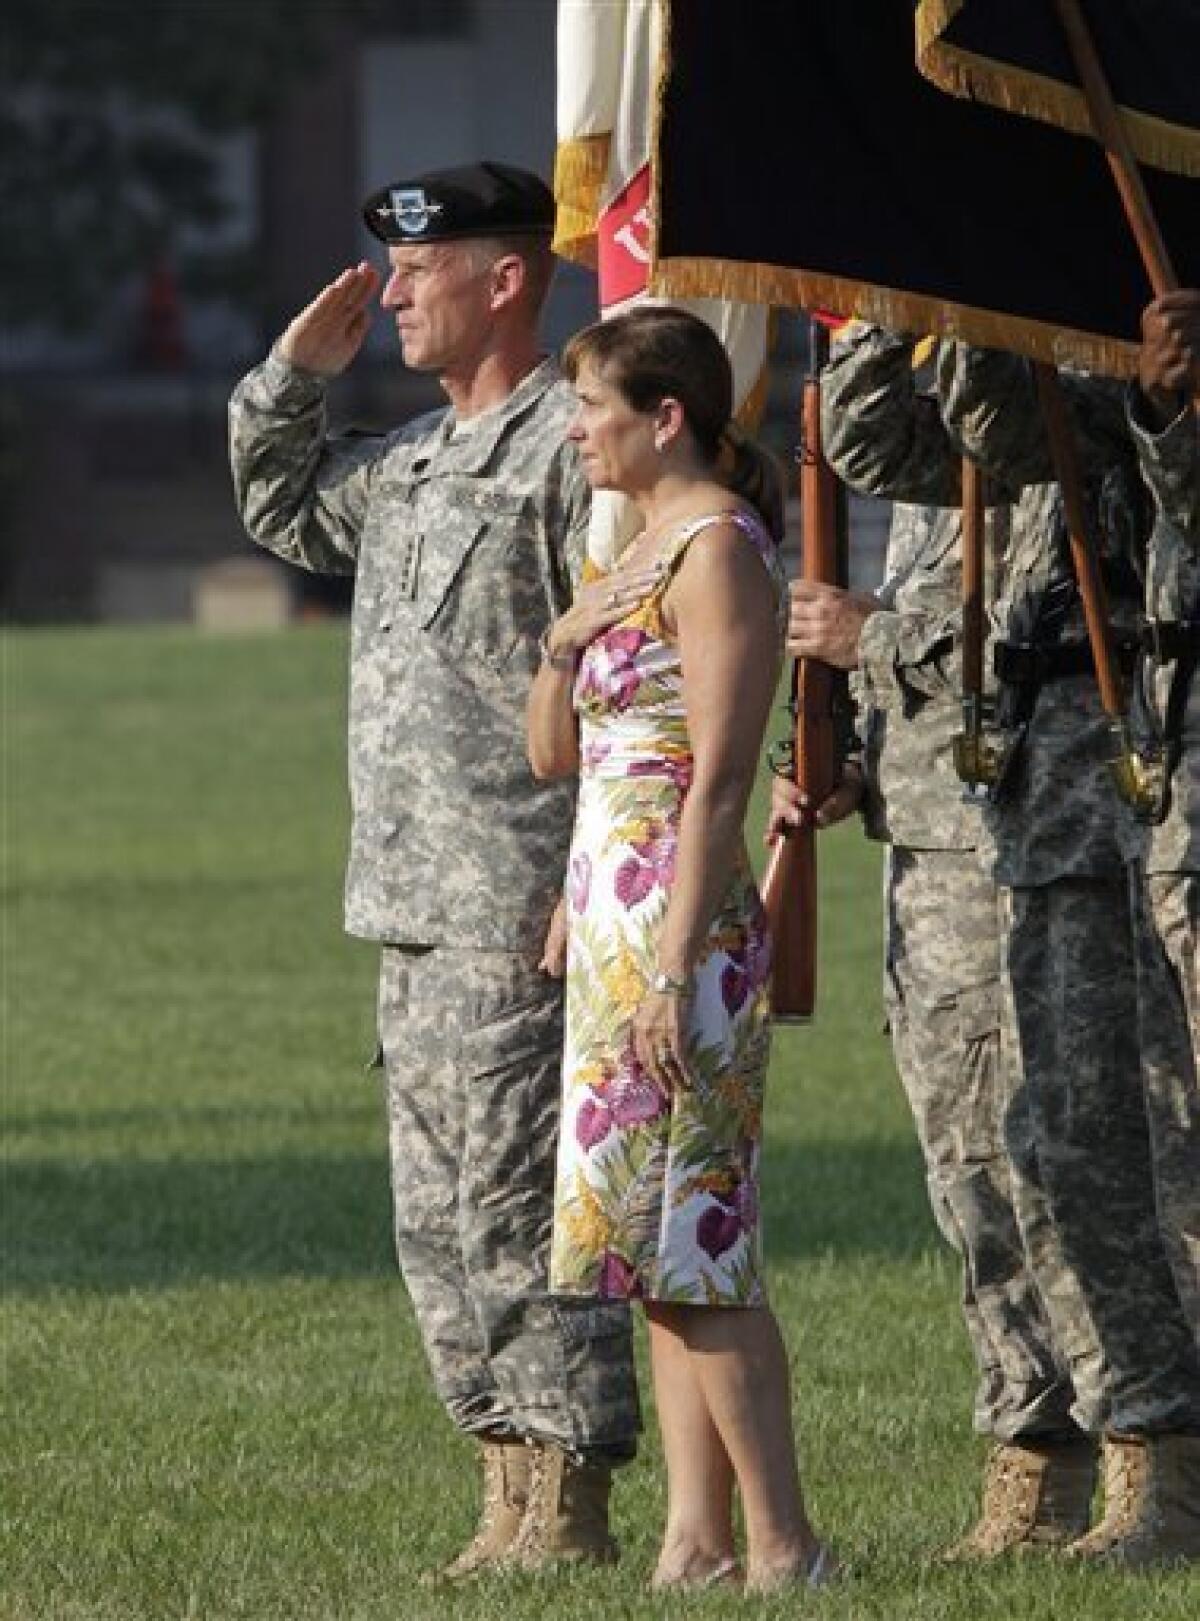 Gen. Stanley McChrystal and his wife Annie stand for the national anthem as he is honored at a retirement ceremony at Fort McNair in Washington, Friday, July 23, 2010. McChrystal's illustrious career came to an abrupt end when he resigned as the top U.S. commander in Afghanistan after he and his staff were quoted in a Rolling Stone magazine article criticizing and mocking key Obama Administration officials. (AP Photo/J. Scott Applewhite)